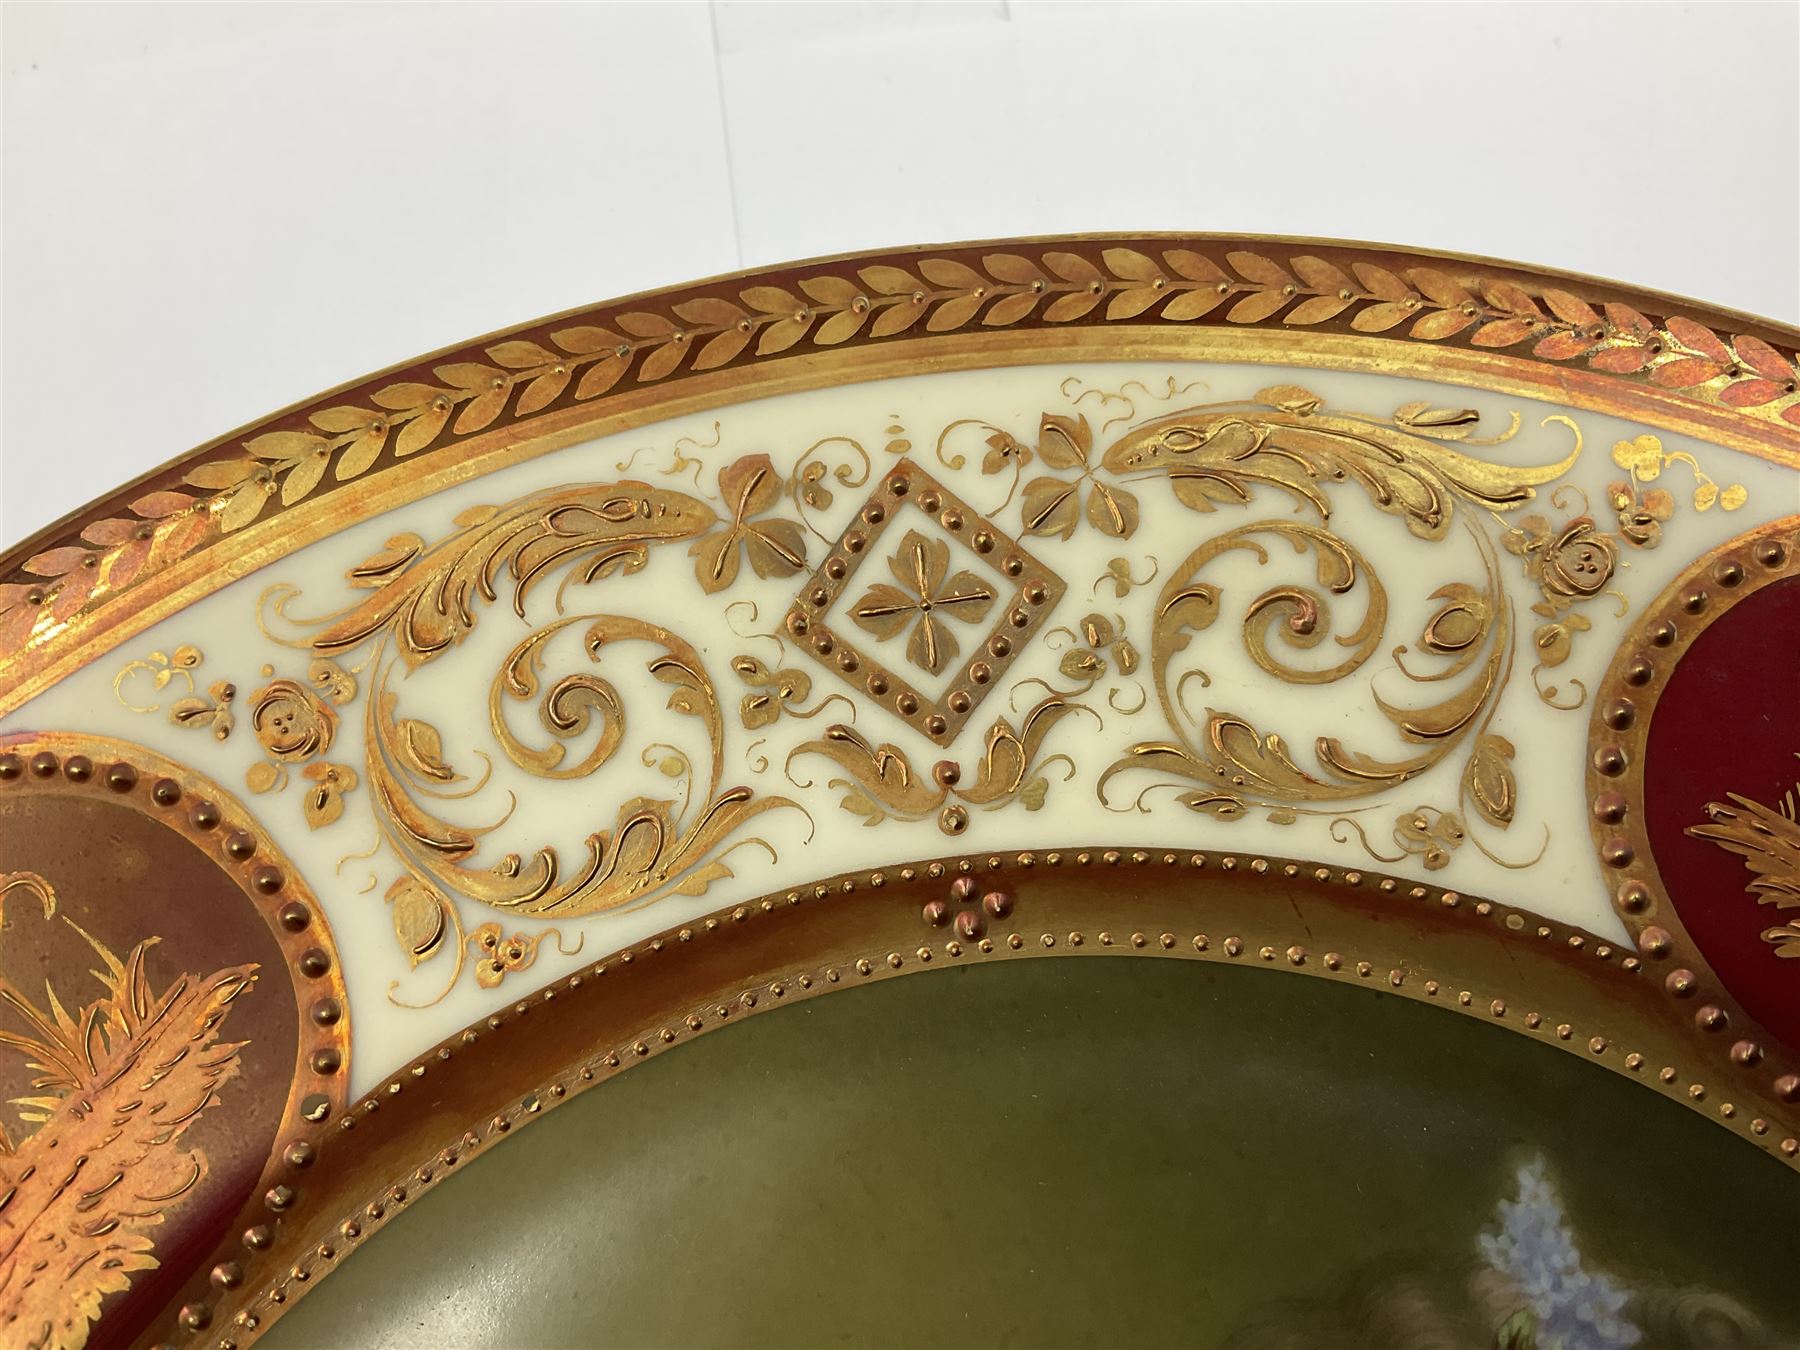 Two late 19th century cabinet plates in the manner of Vienna - Image 19 of 24